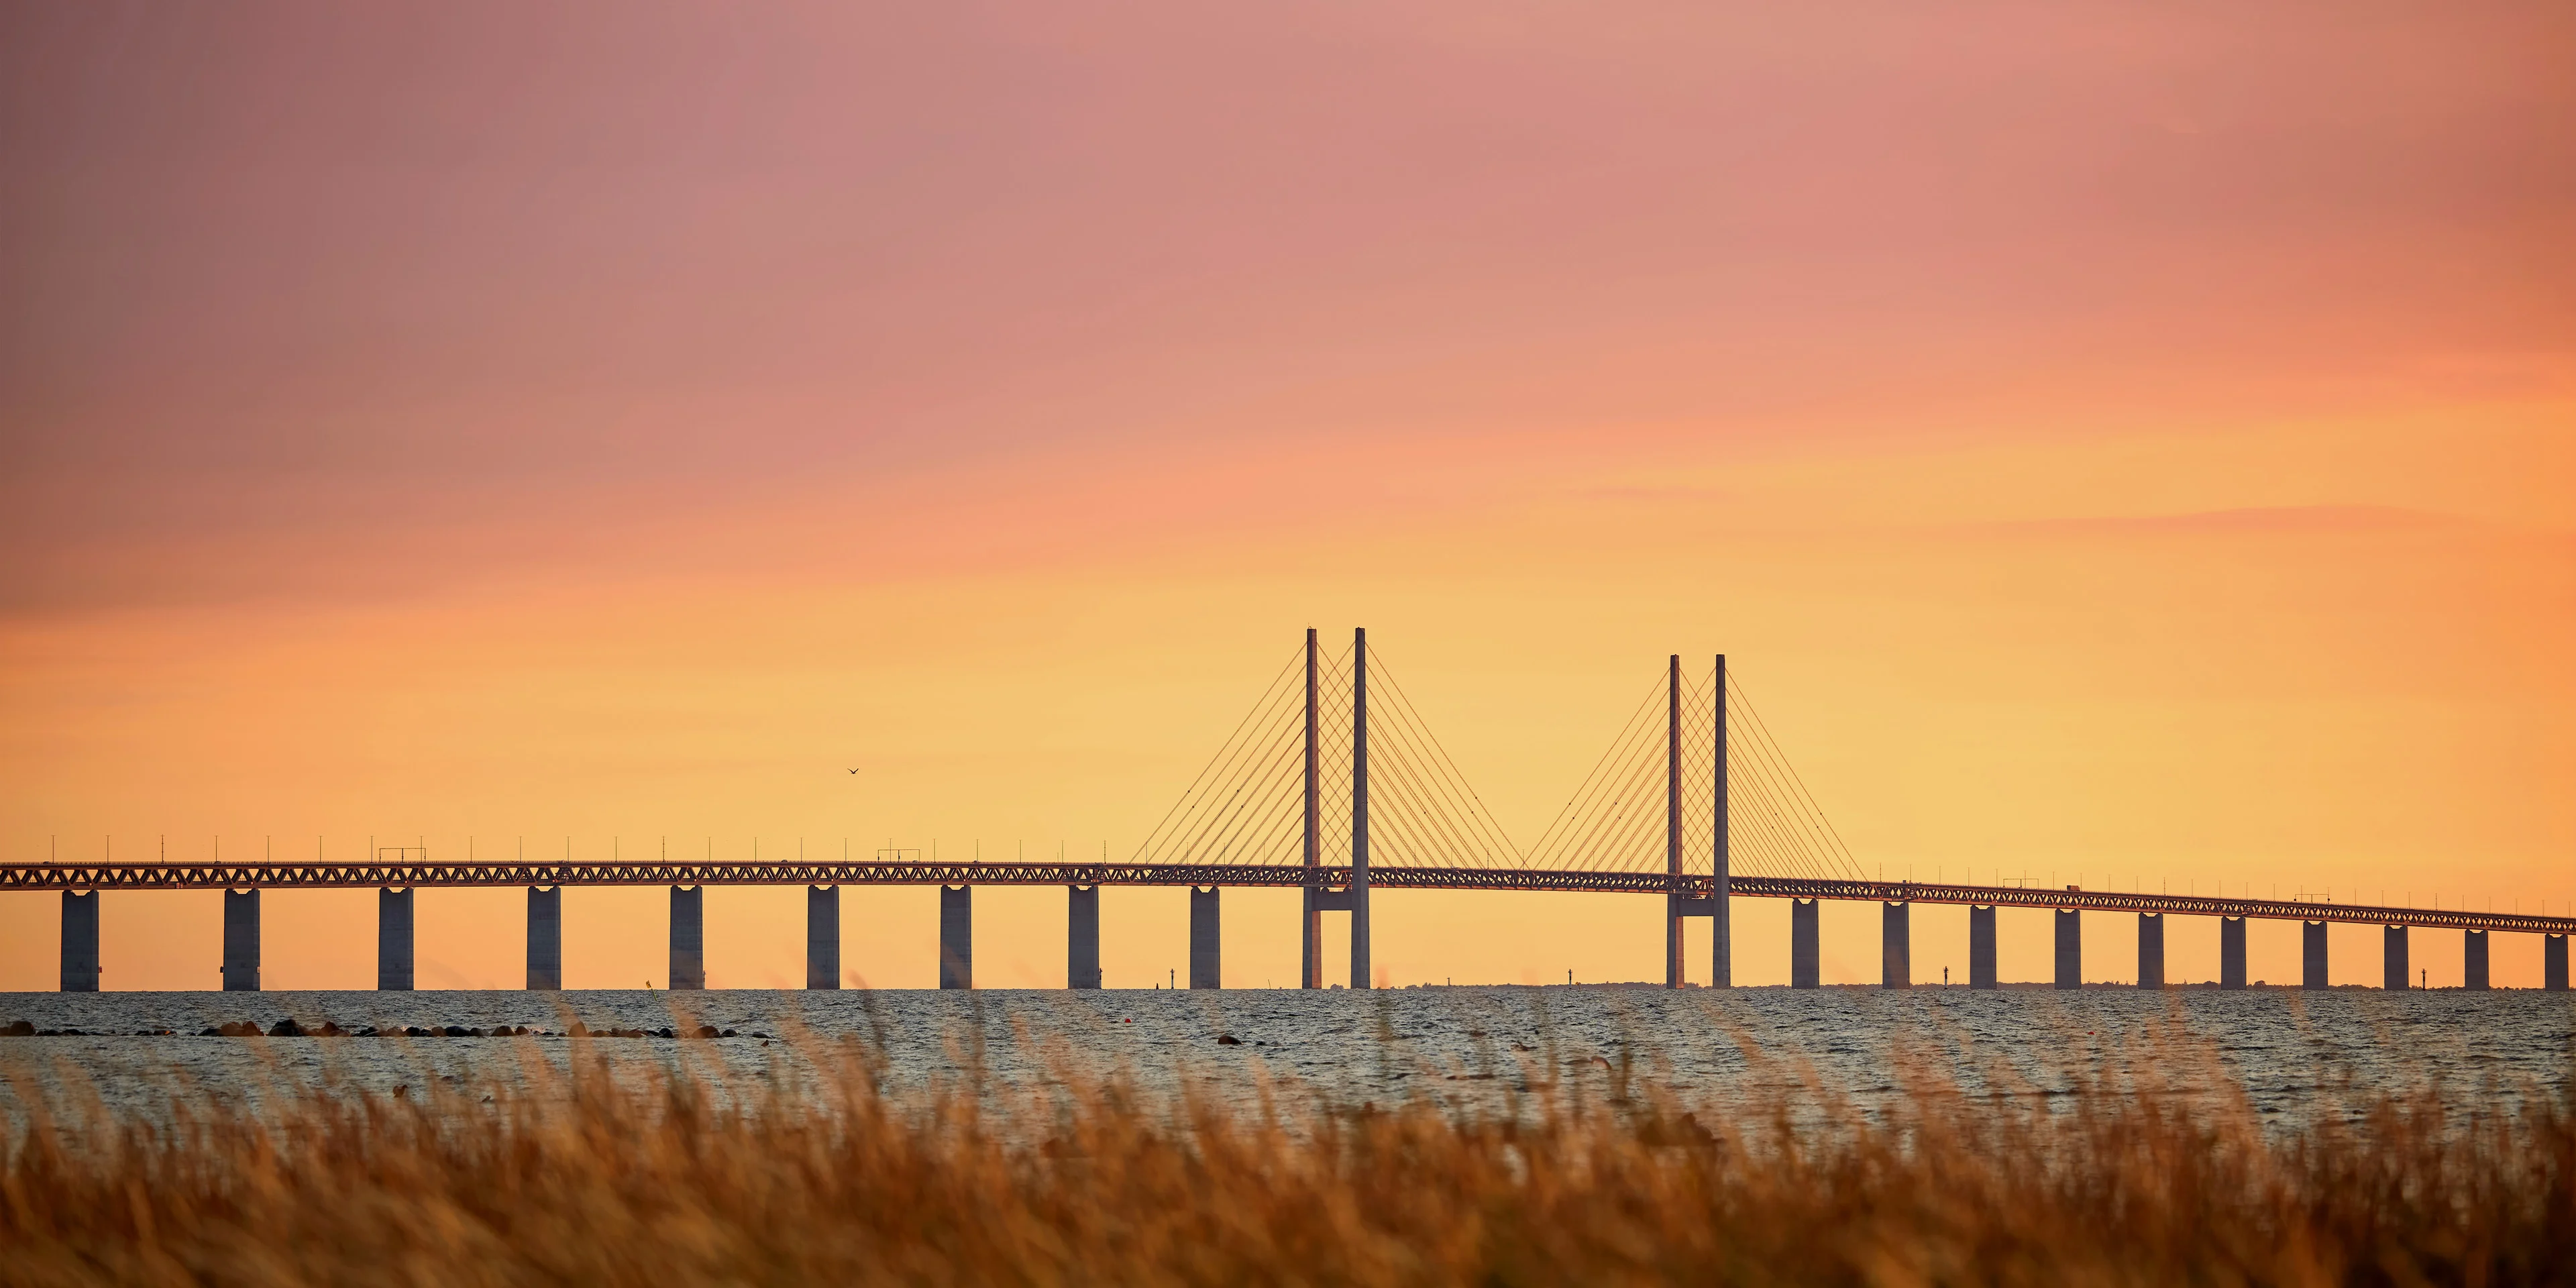 The Øresund bridge with pink and yellow colours in the sky and tall grass in the foreground.